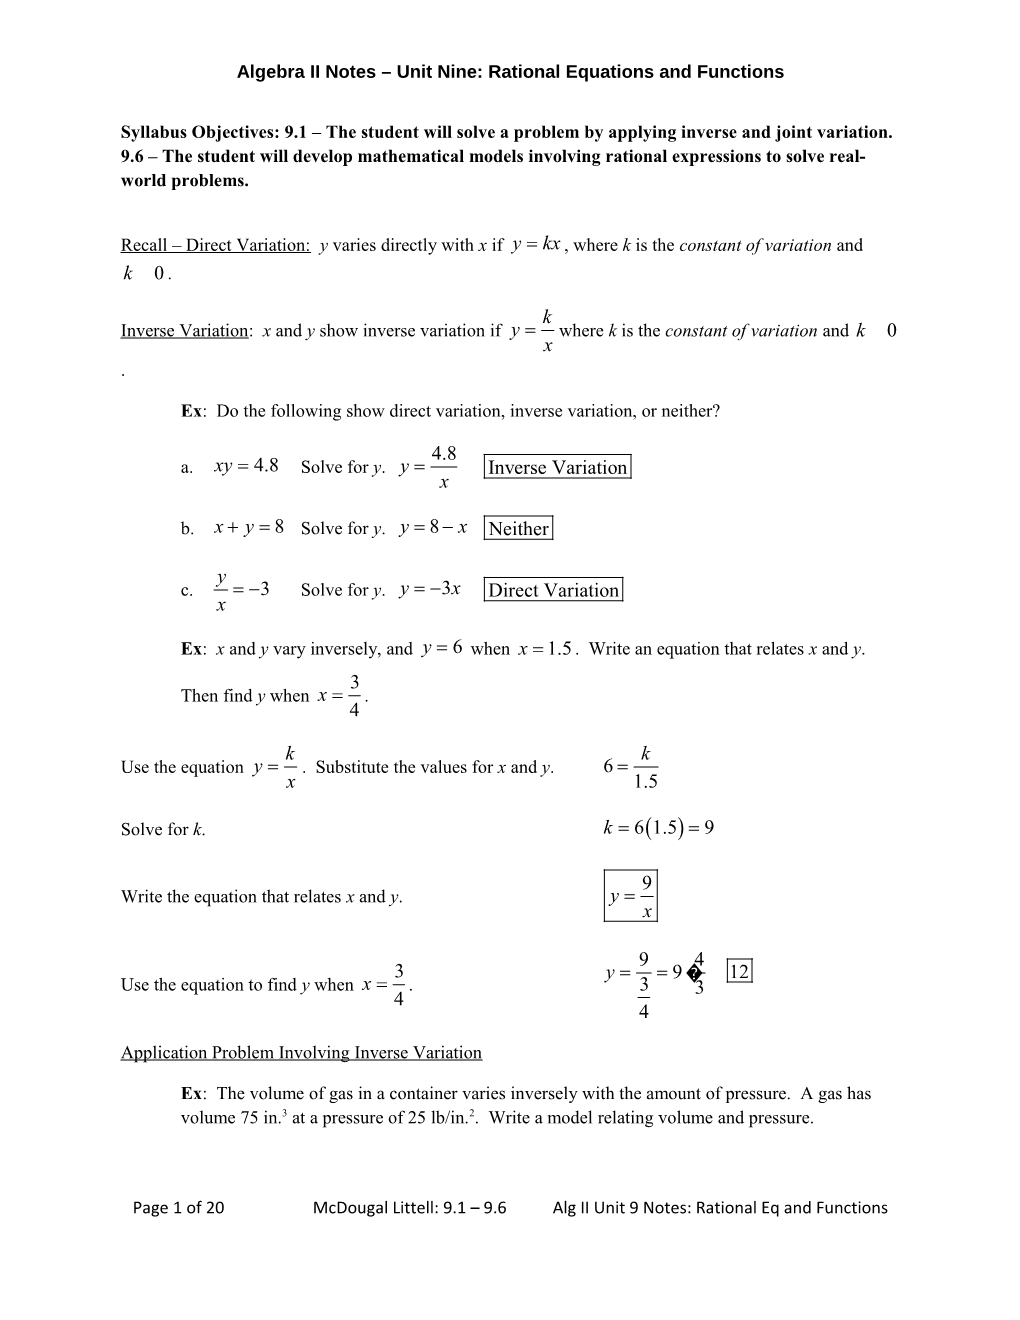 Algebra II Notes Unit Nine: Rational Equations and Functions